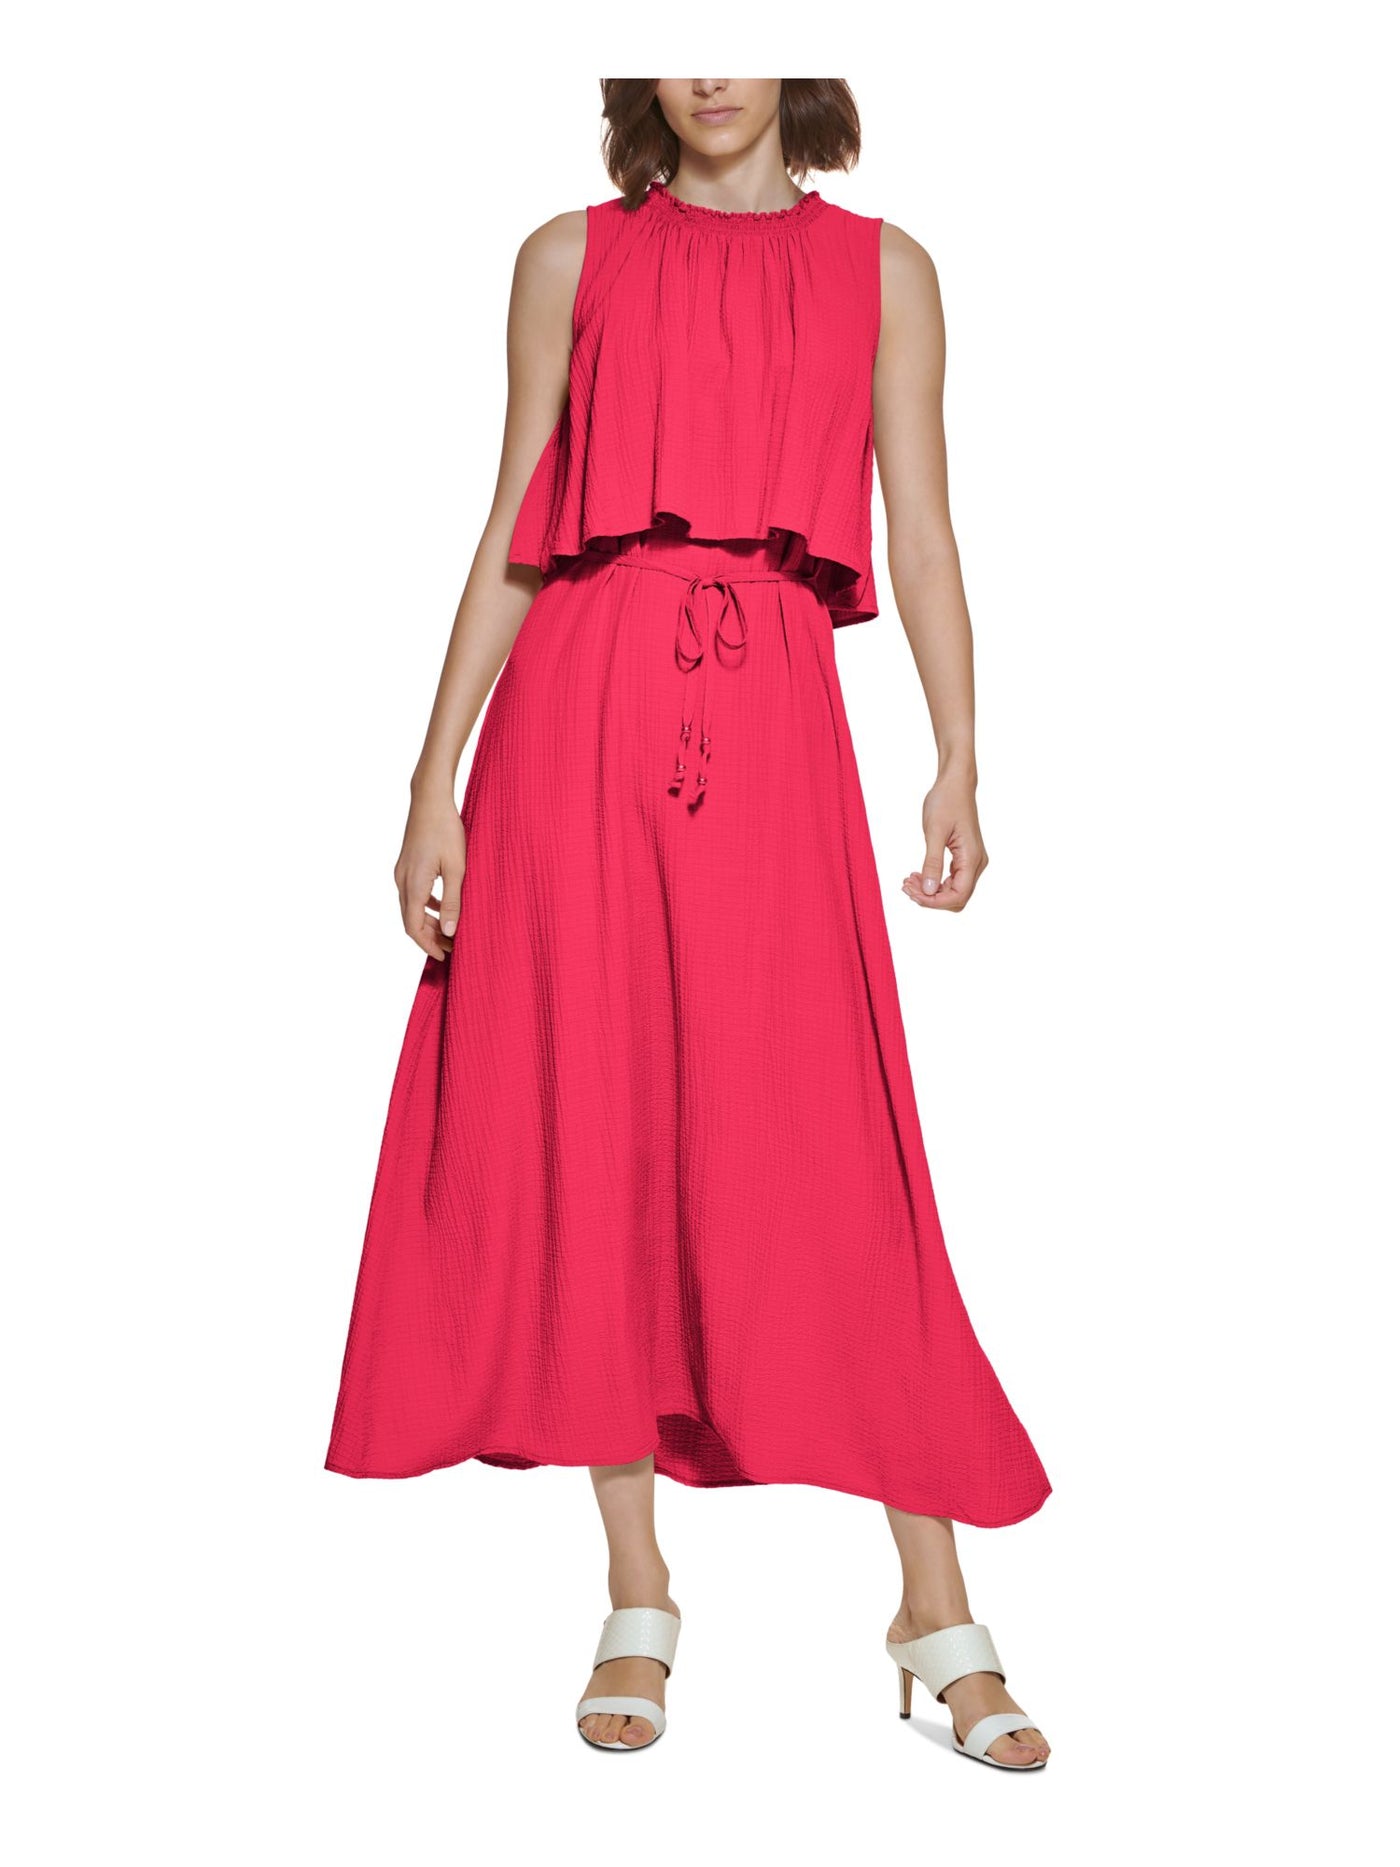 CALVIN KLEIN Womens Pink Smocked Belted Keyhole Back Popover Sleeveless Round Neck Maxi Wear To Work Fit + Flare Dress 10